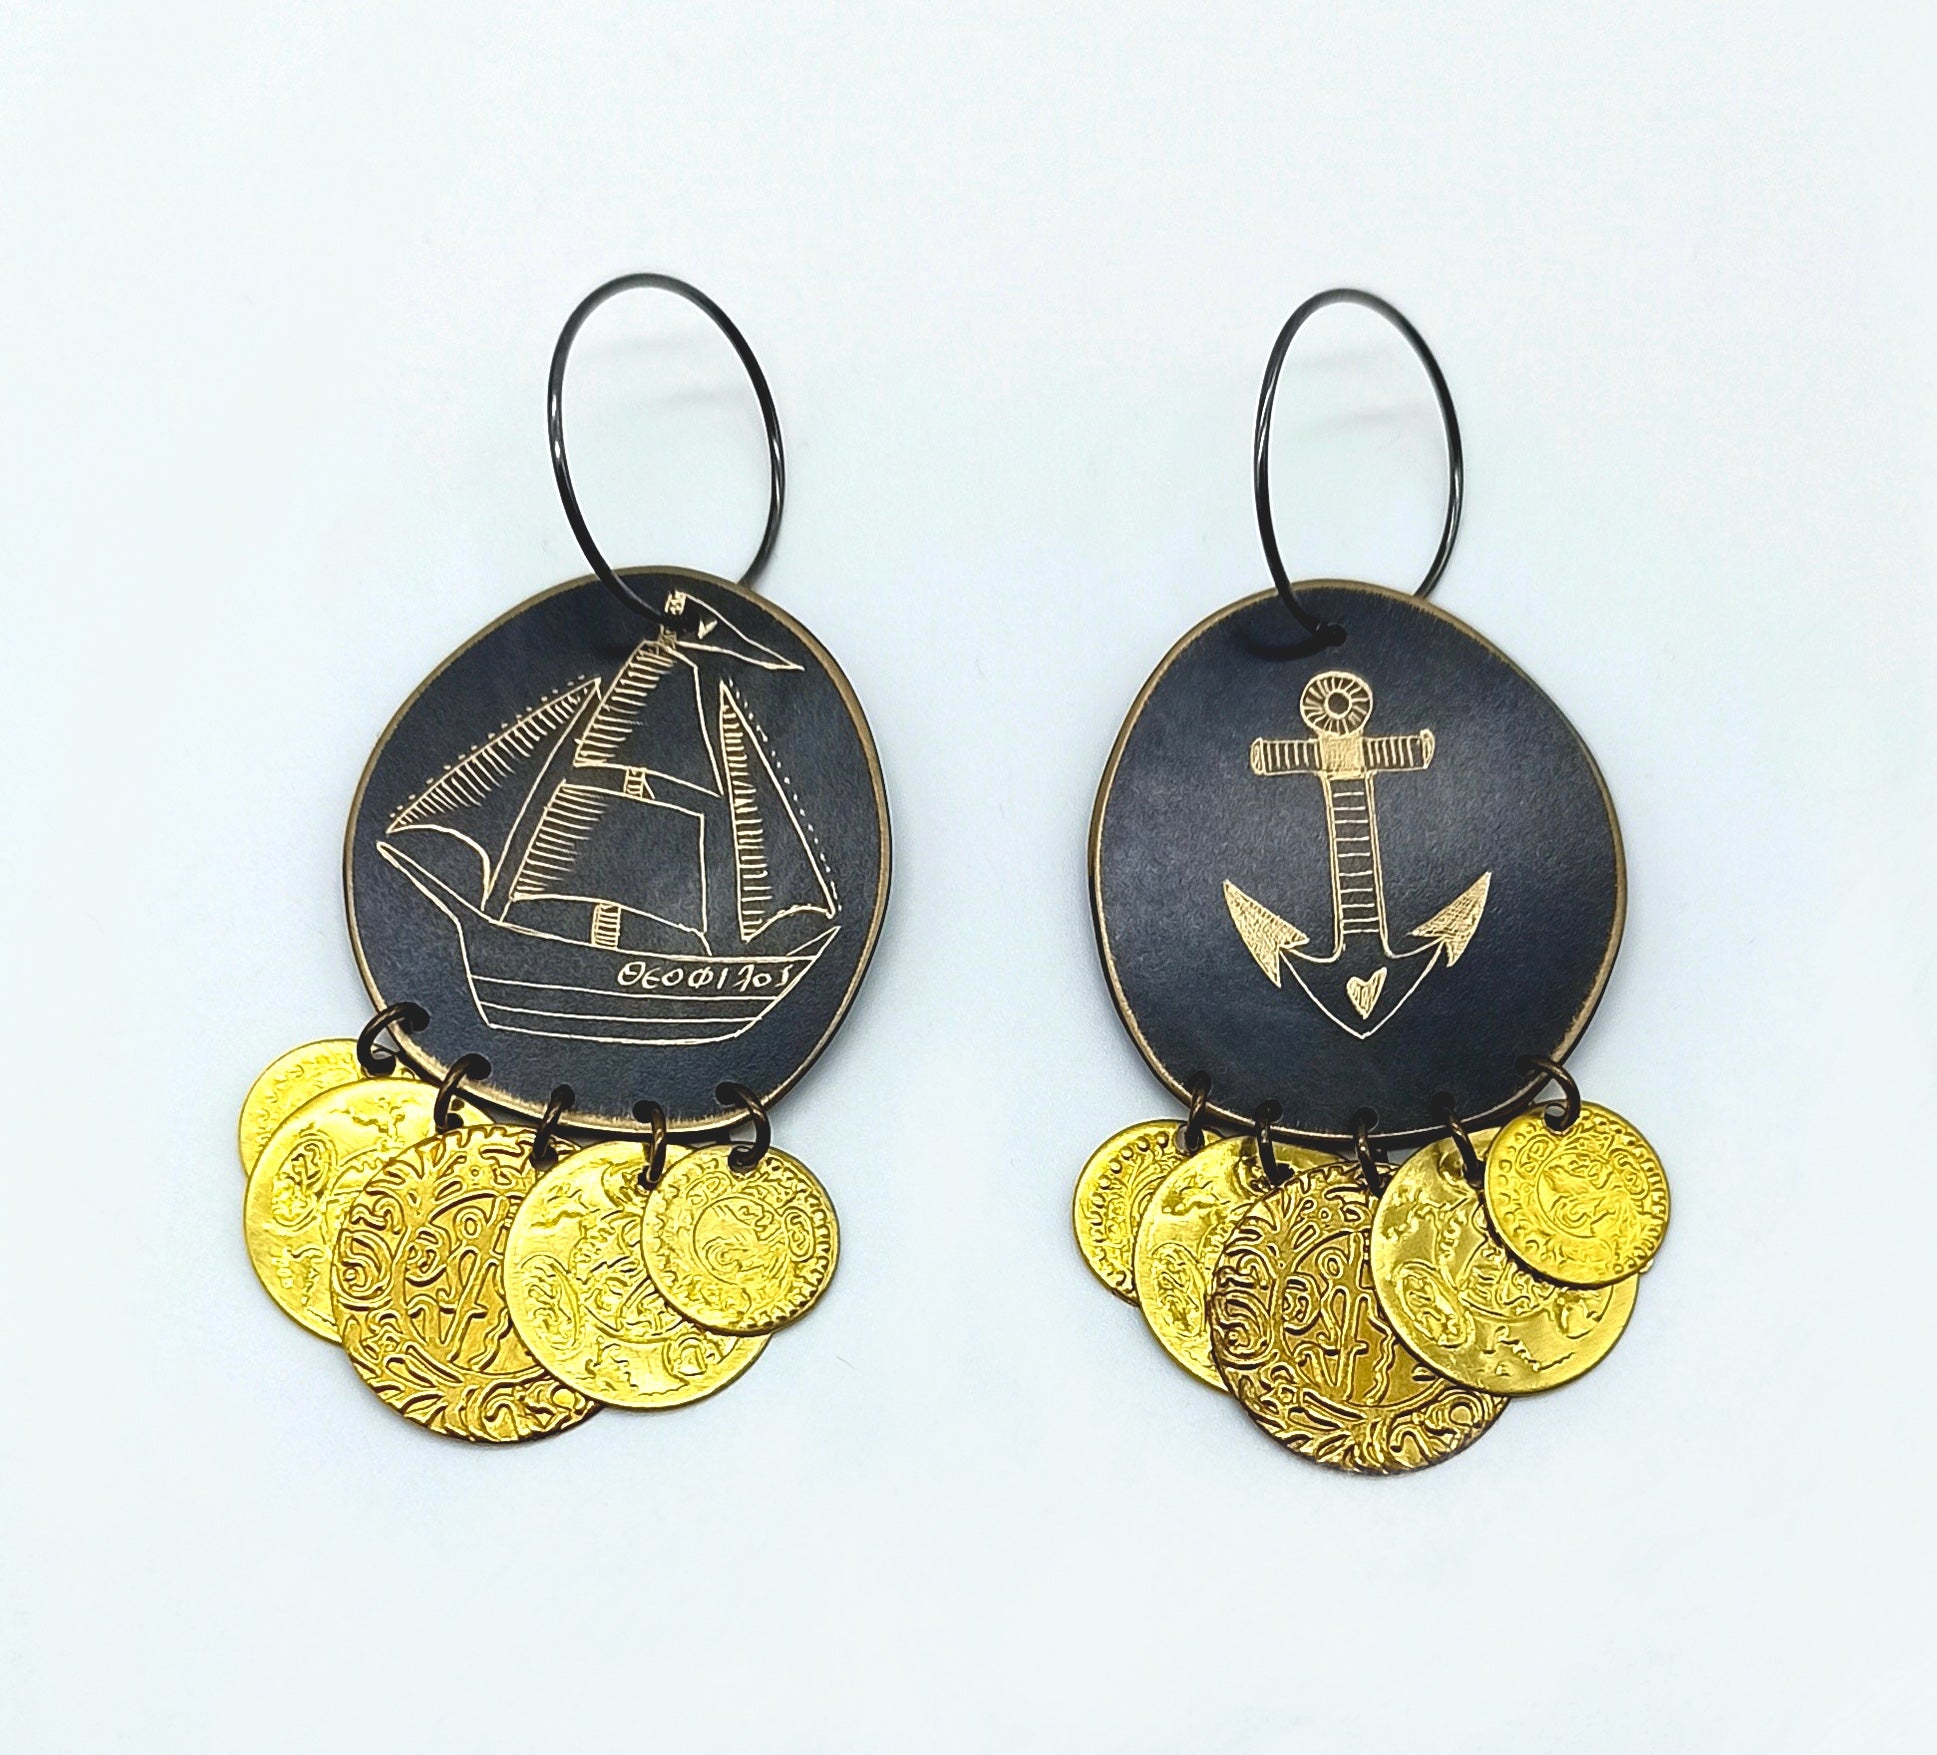 Little ship and anchor earrings